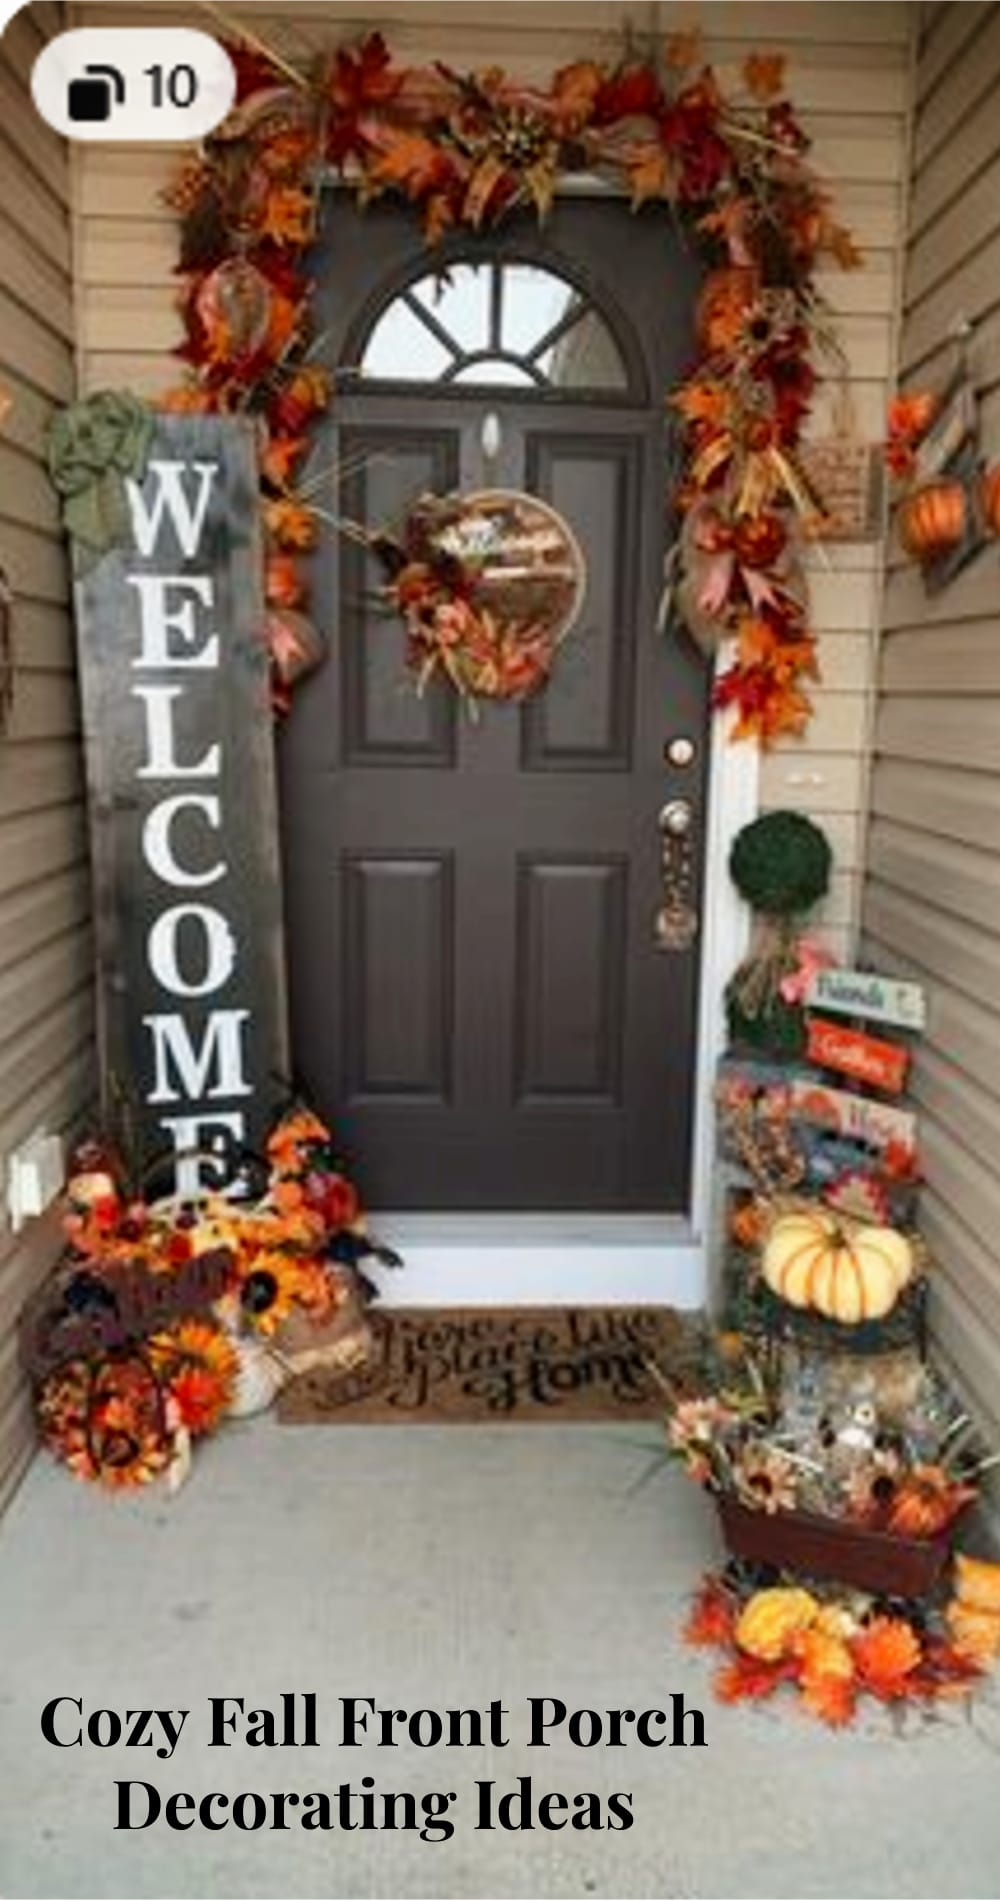 Front porch decorating ideas for Fall - just LOVE this cozy Fall front porch - easy enough DIY decorating project I can do for Autumn, after Halloween, Thanksgiving season - the welcome sign and pumpkins just pull it all together